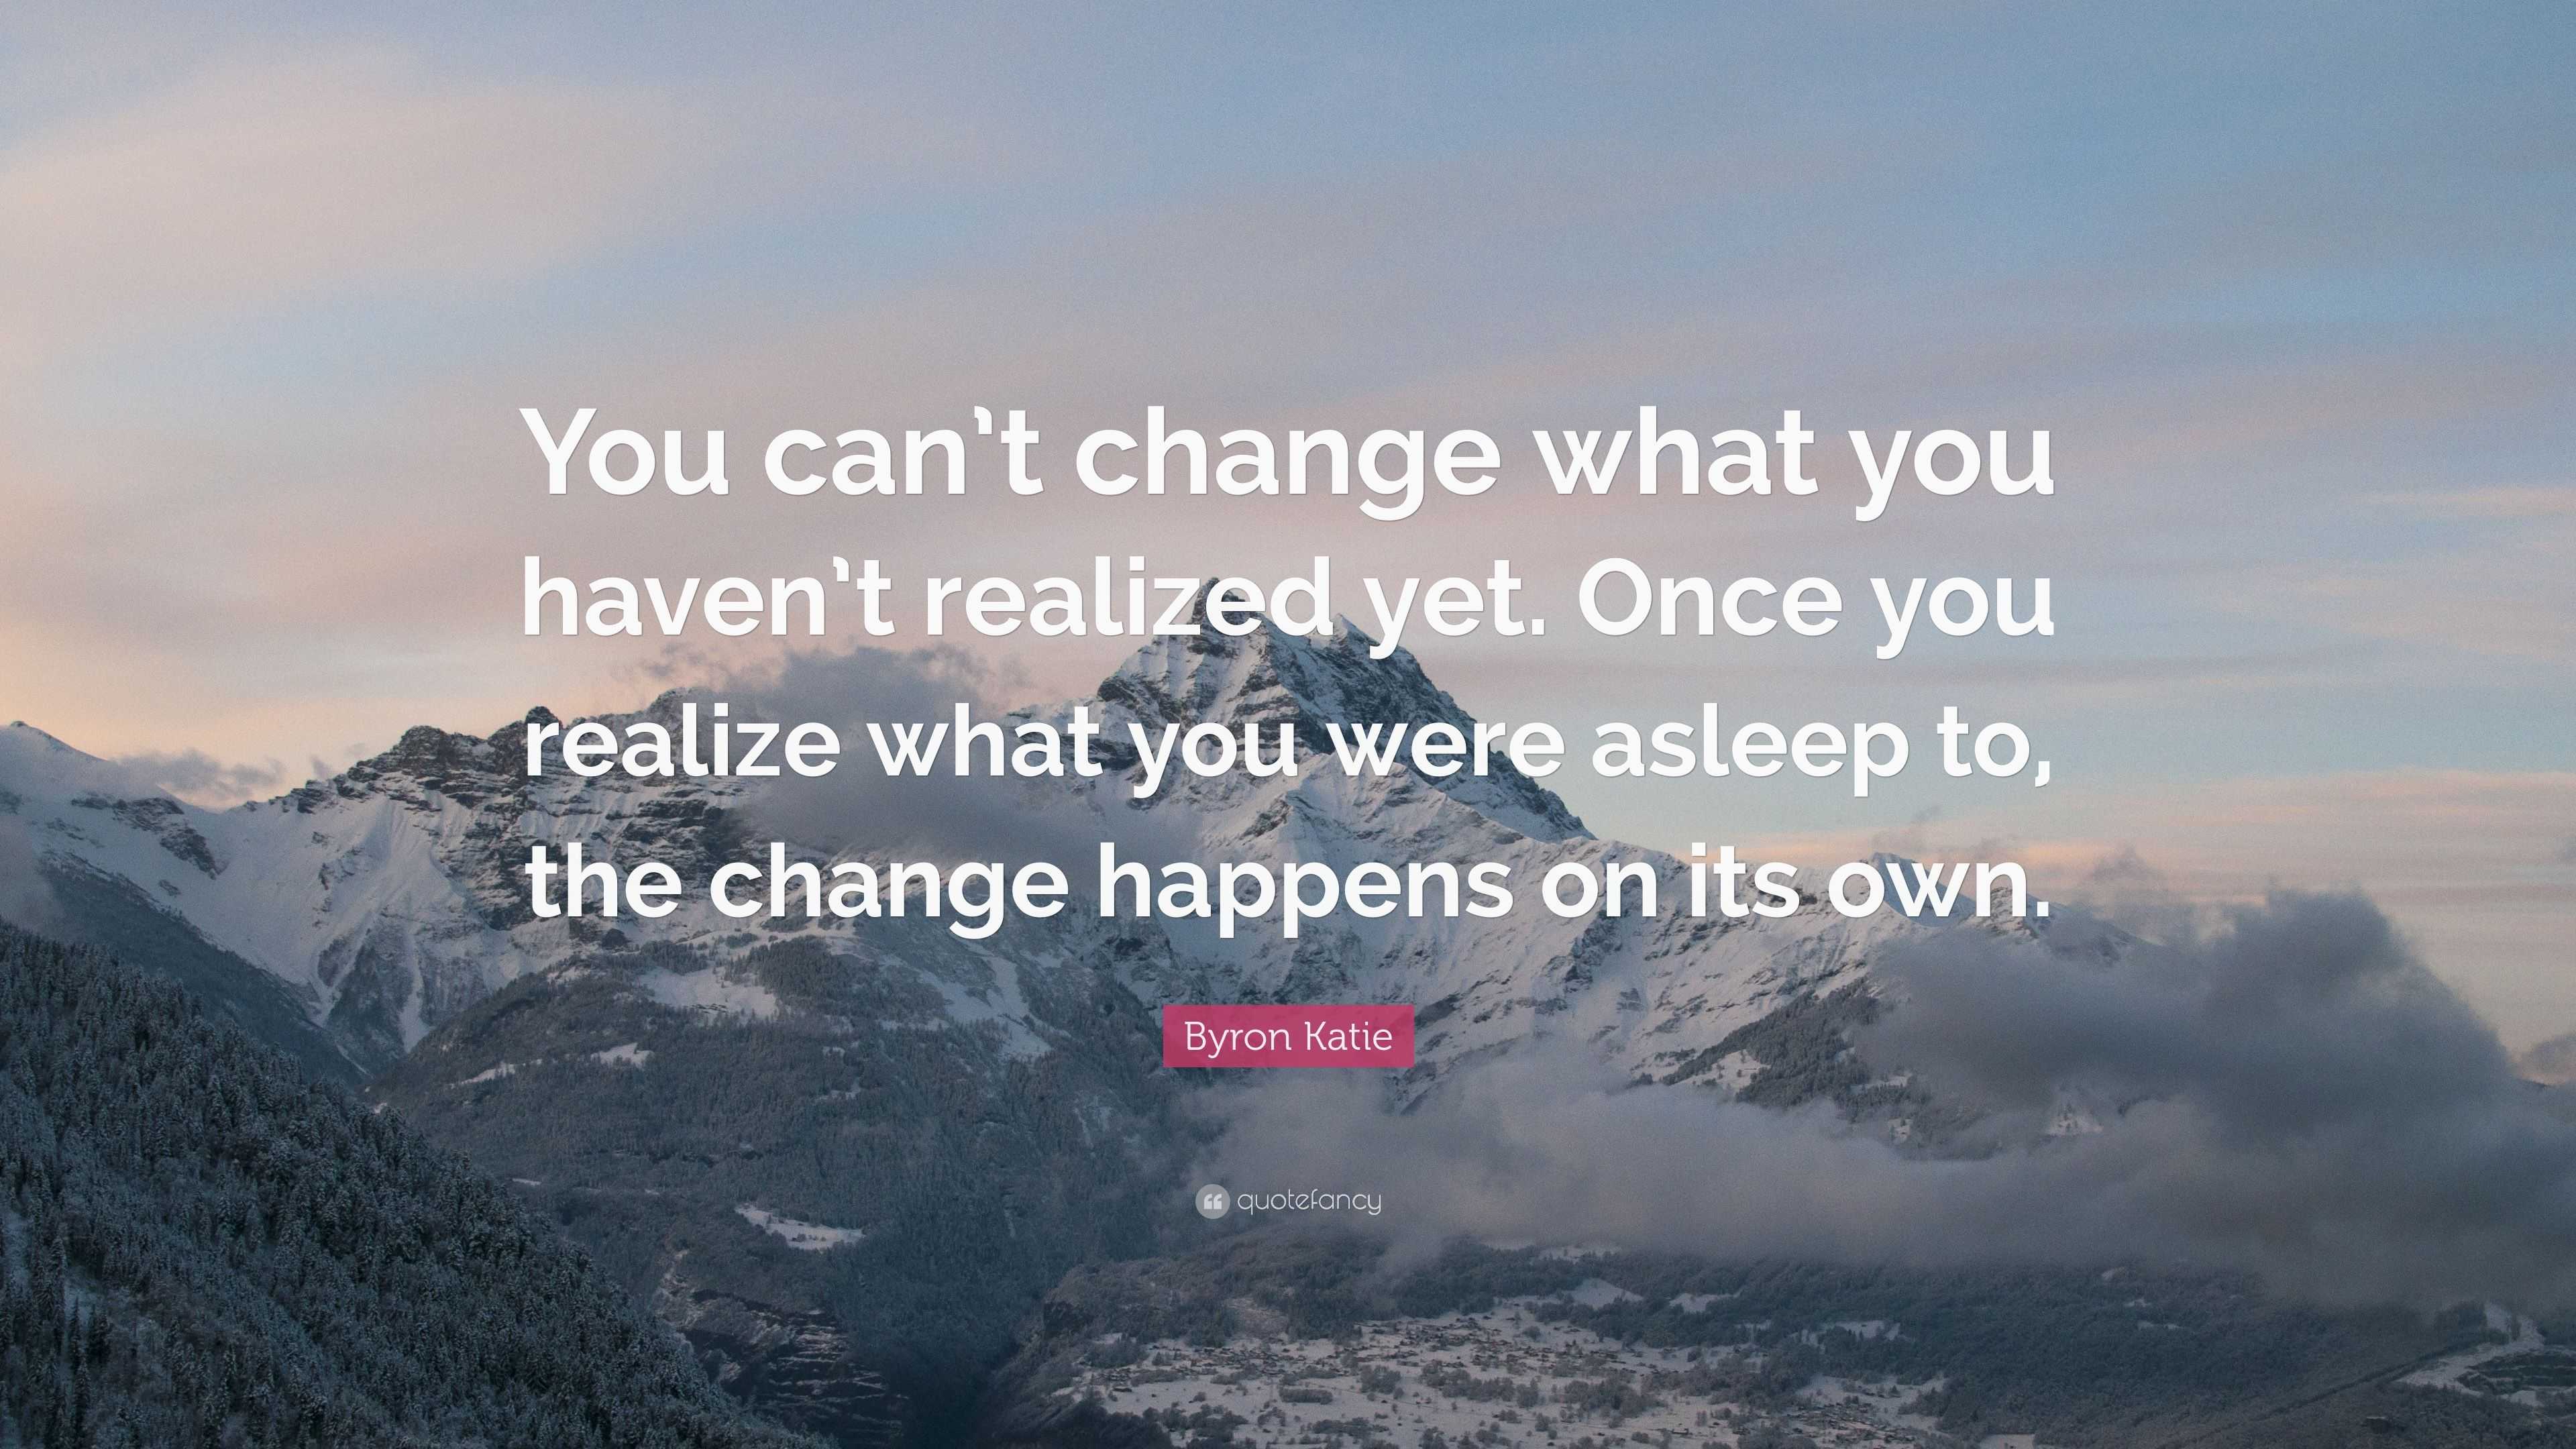 Byron Katie Quote: “You can’t change what you haven’t realized yet ...